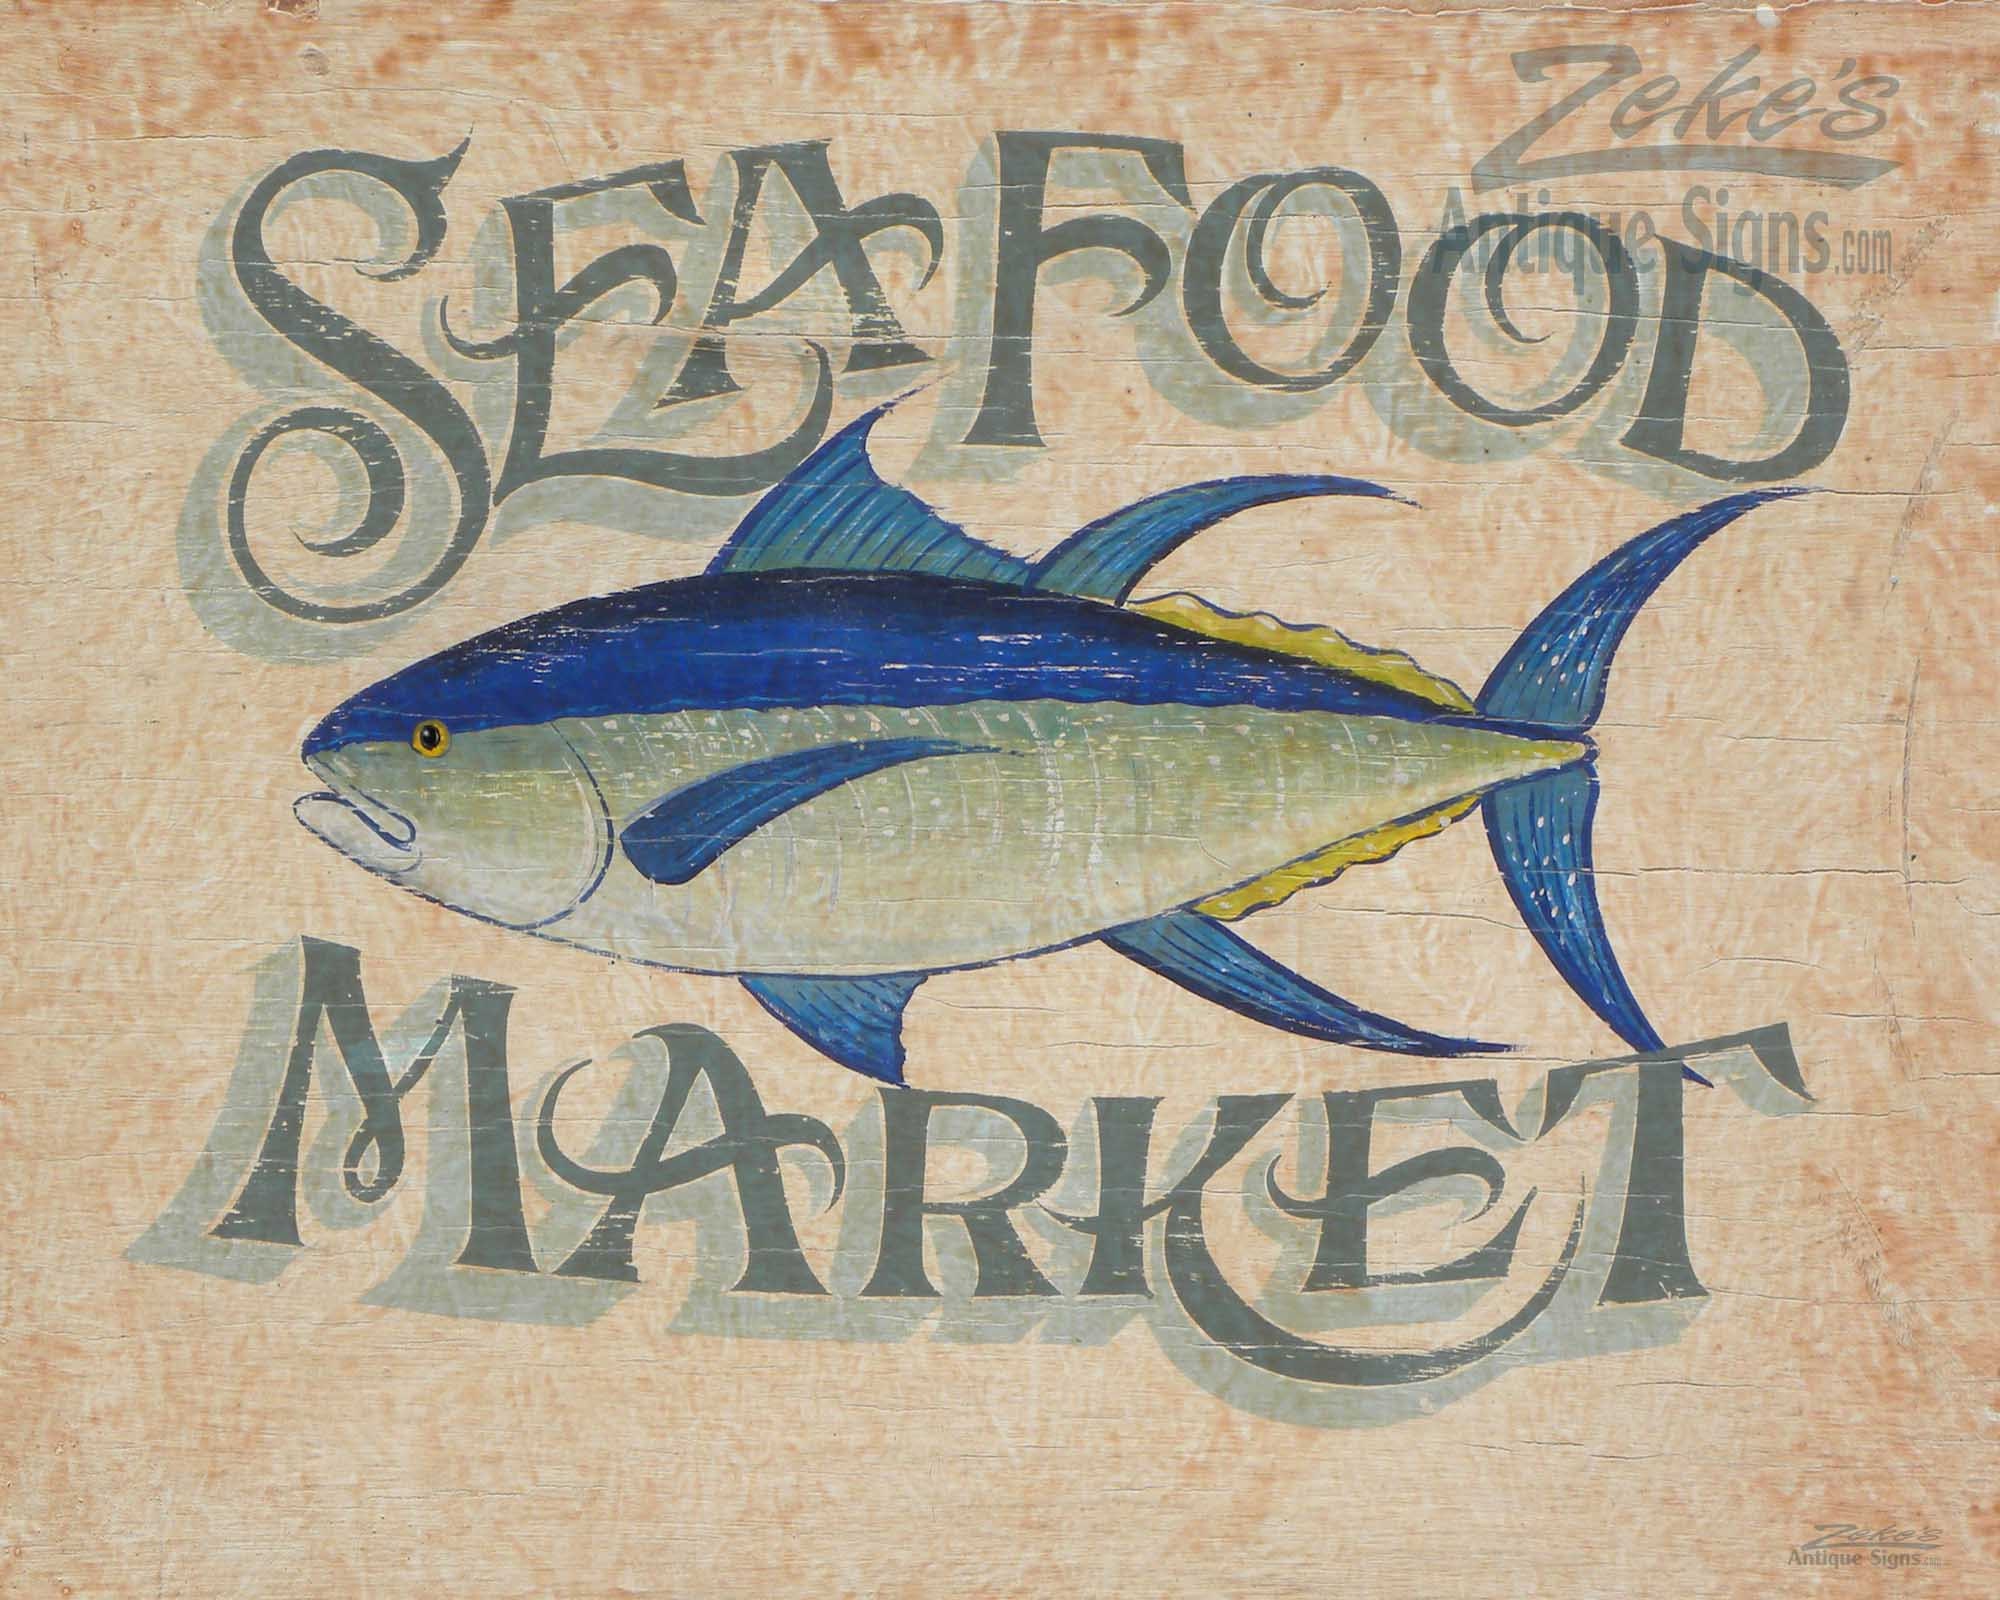 Seafood Market Print From An Original Hand Painted & Lettered Sign. Tuna Fishing Decor Art